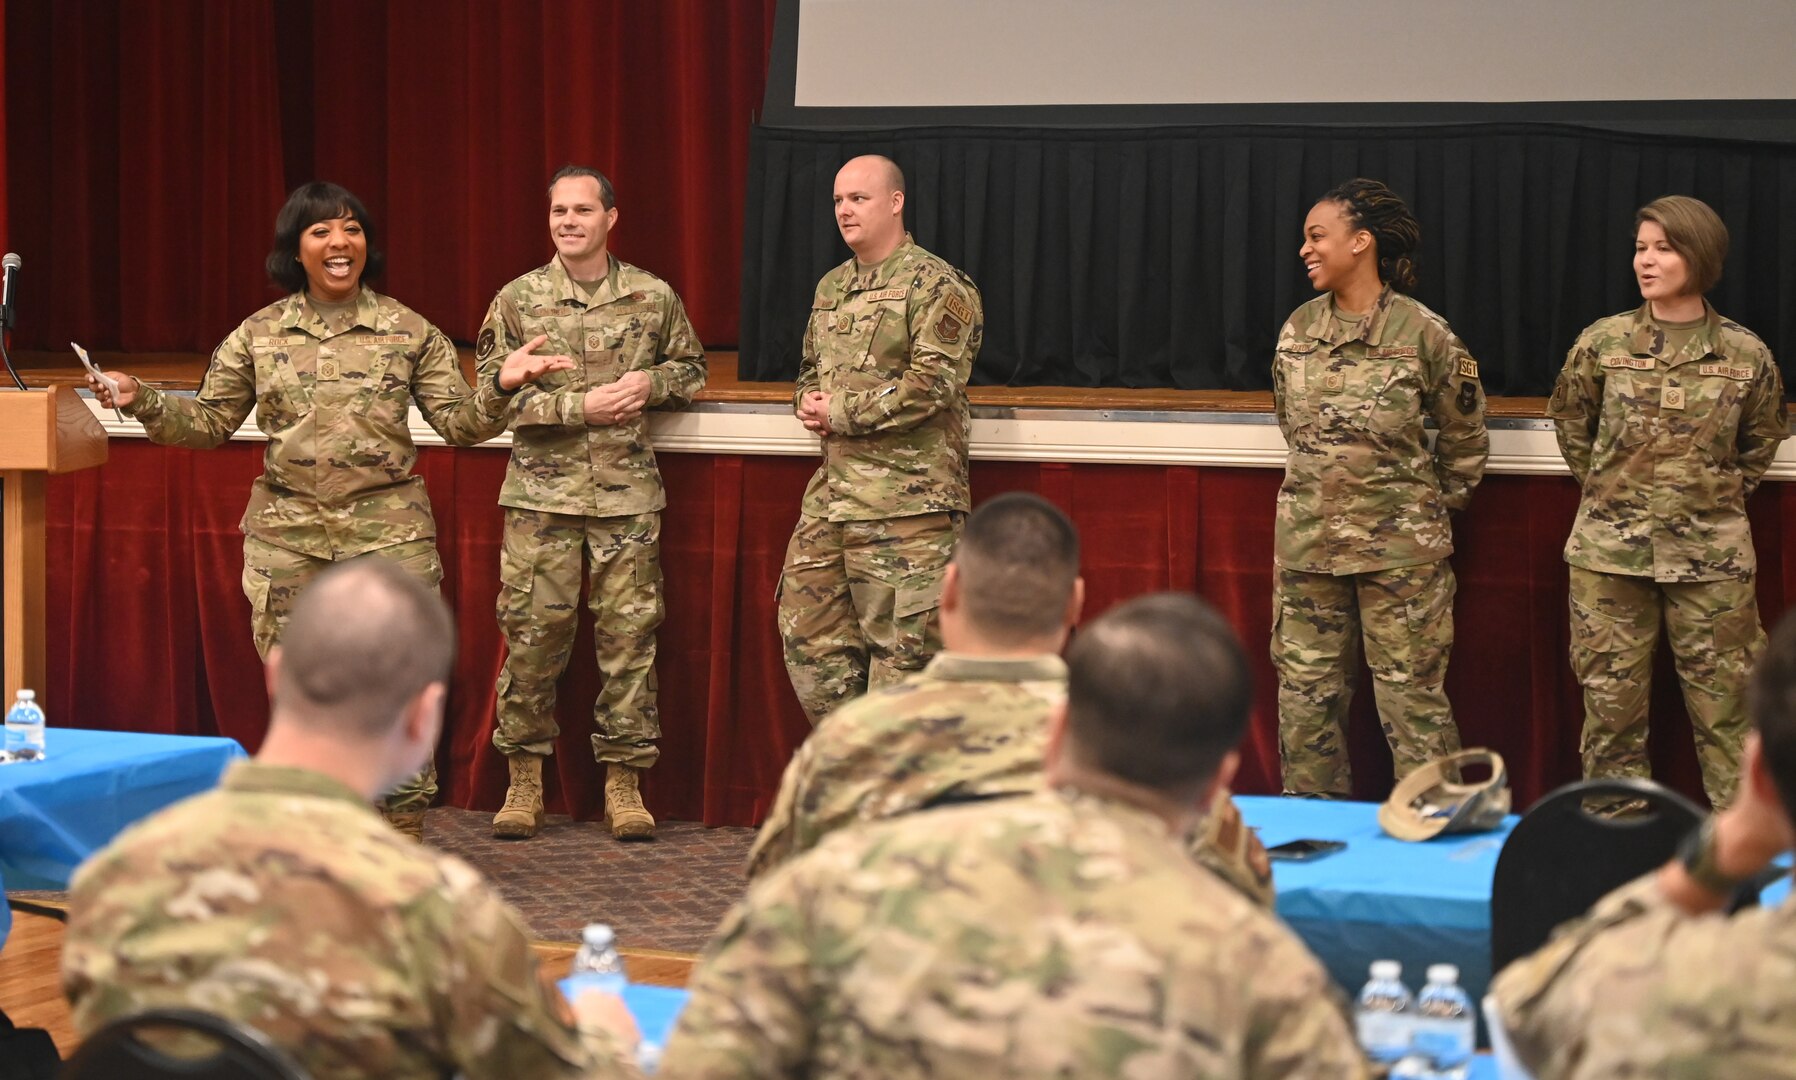 First Sergeant Candist Rock introduces the student airmen to the coming agenda of the 960th Cyberspace Wing Additional Duty First Sergeant Symposium at Joint Base San Antonio-Lackland on March 27, 2023. (U.S. Air Force photo by 2nd Lt. Alex Dieguez)